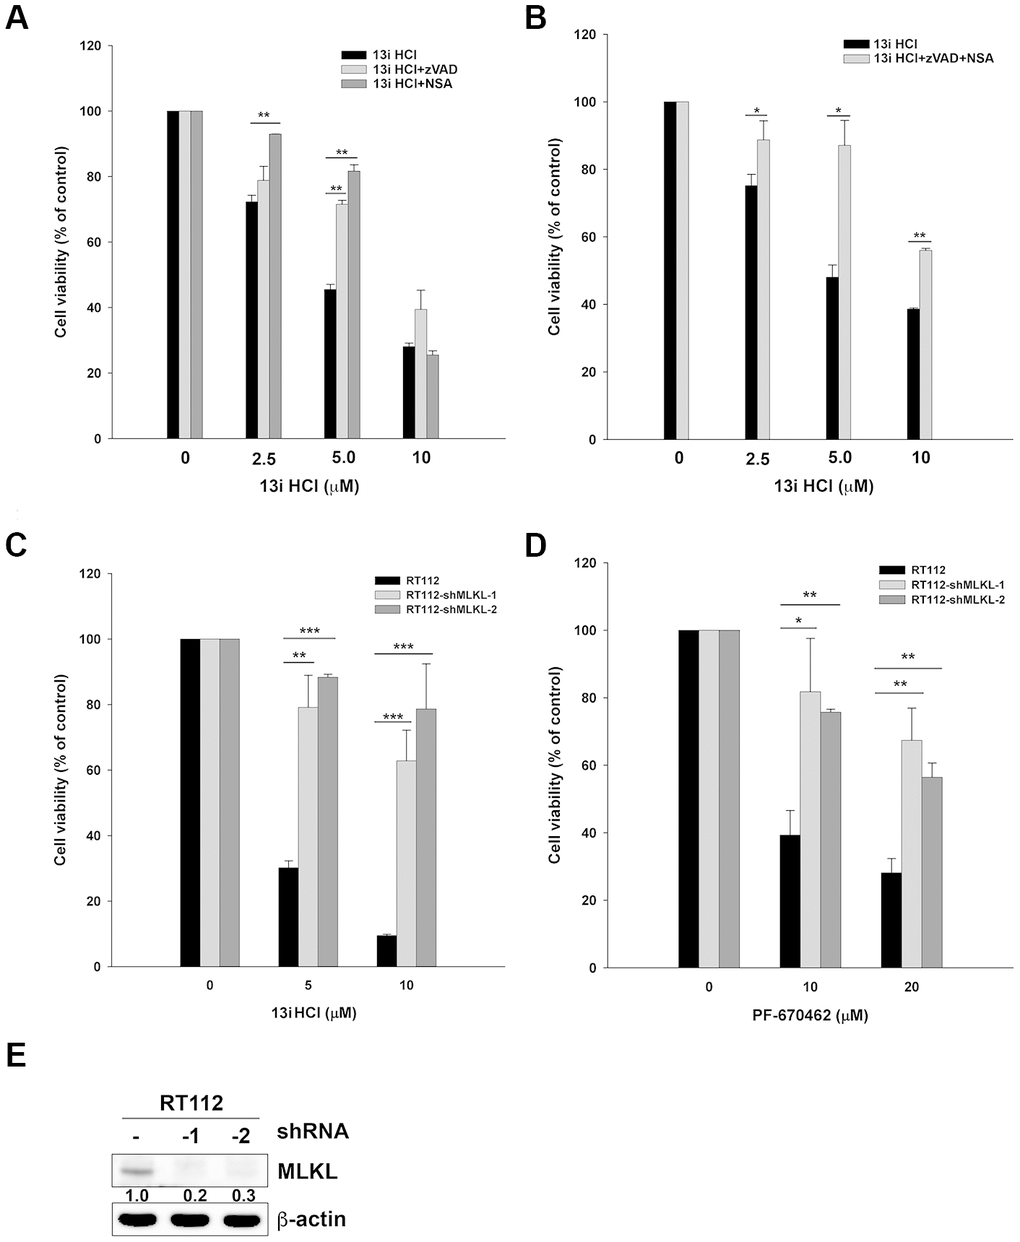 Inhibition of CK1δ activates necroptosis in bladder cancer cells. (A) RT112 cells were treated with the indicated concentrations of 13i HCl in the presence or absence of zVAD (20 μM) or NSA (10 μM) for 48 h and subjected to MTT assay. Data are represented as mean ± S.D. **PB) RT112 cells were treated with the indicated concentrations of 13i HCl in the presence or absence of zVAD (20 μM) plus NSA (10 μM) for 48 h and subjected to MTT assay. Data are represented as mean ± S.D. *PPC, D) RT112 and MLKL stable knocked-down clone (shMLKL-1, shMLKL-2) cells were treated with the indicated concentrations of 13i HCl (C) or PF-670462 (D) for 72 h and subjected to MTT assay. Data are represented as mean ± S.D. *PPPE) The knockdown efficiency of MLKL in RT112 cells was examined by Western blotting.